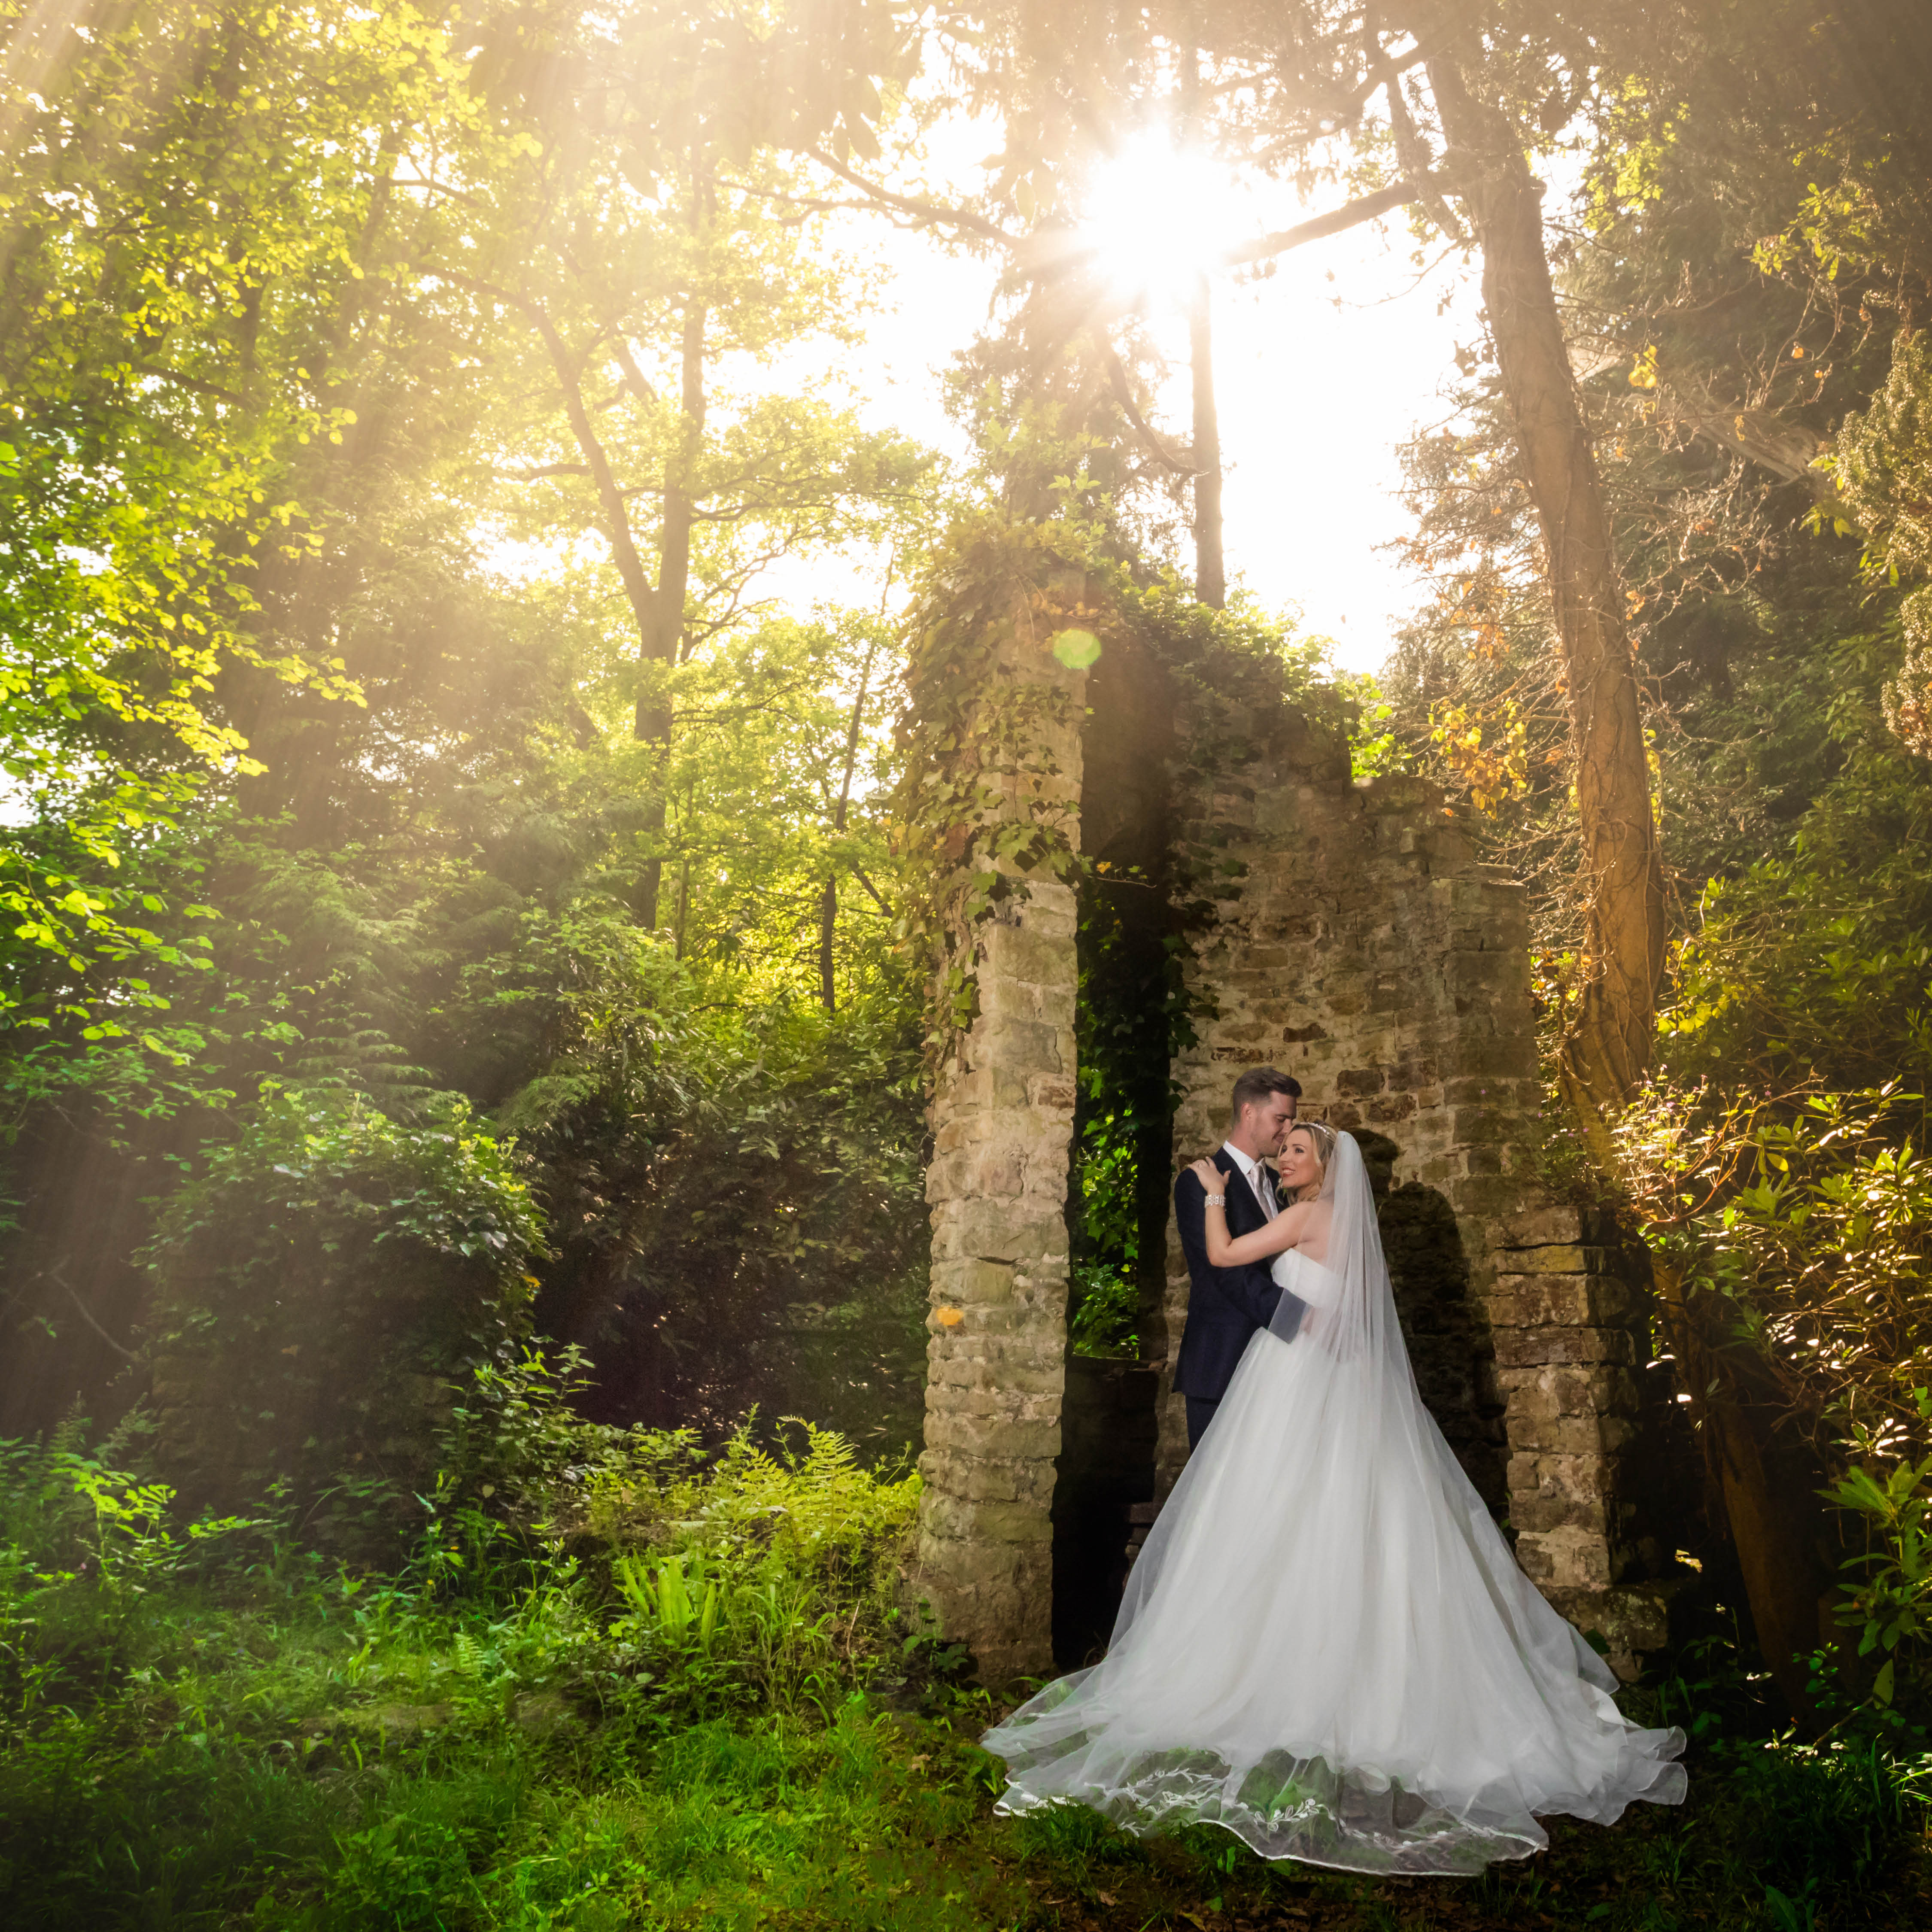 How To Choose The Right Wedding Photographer For Your Special Day, wedding photography portfolio